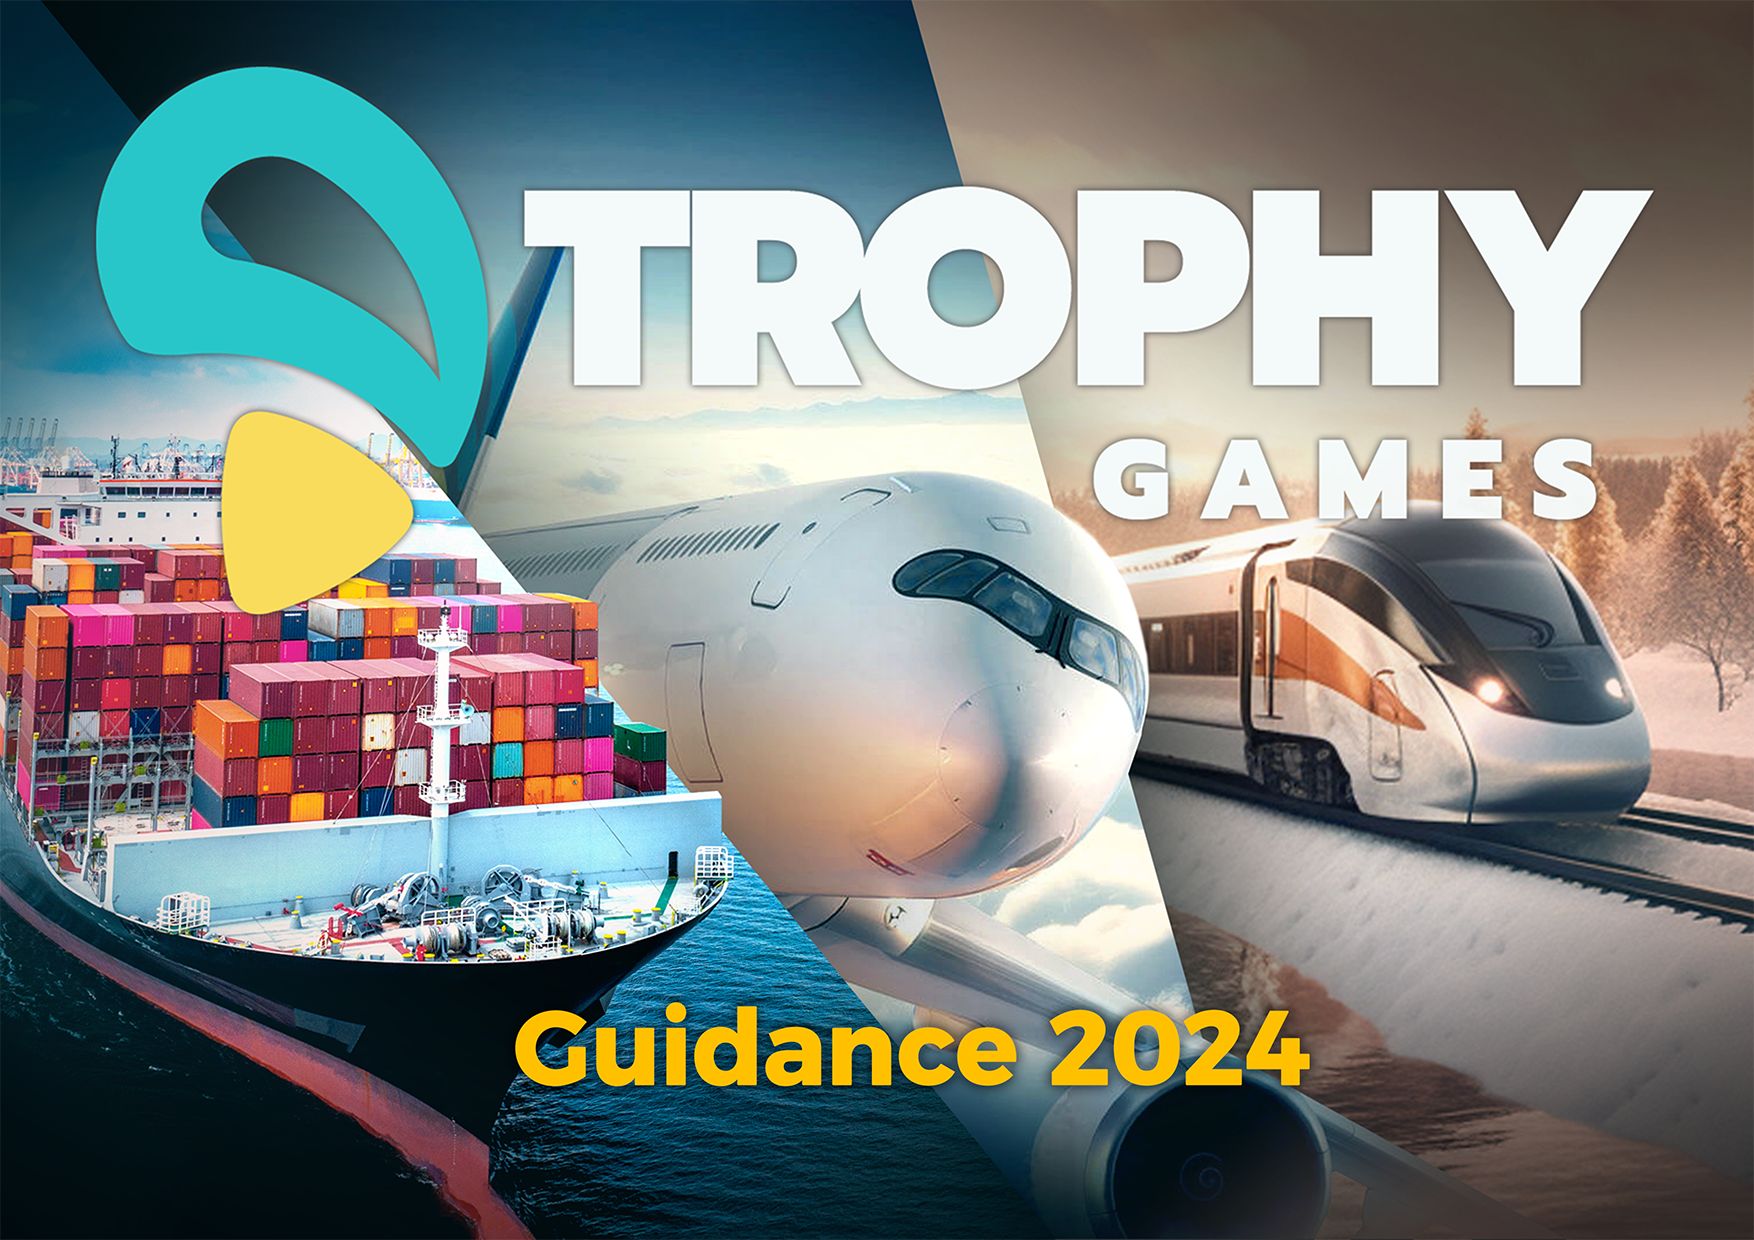 Trophy Games guidance 2024